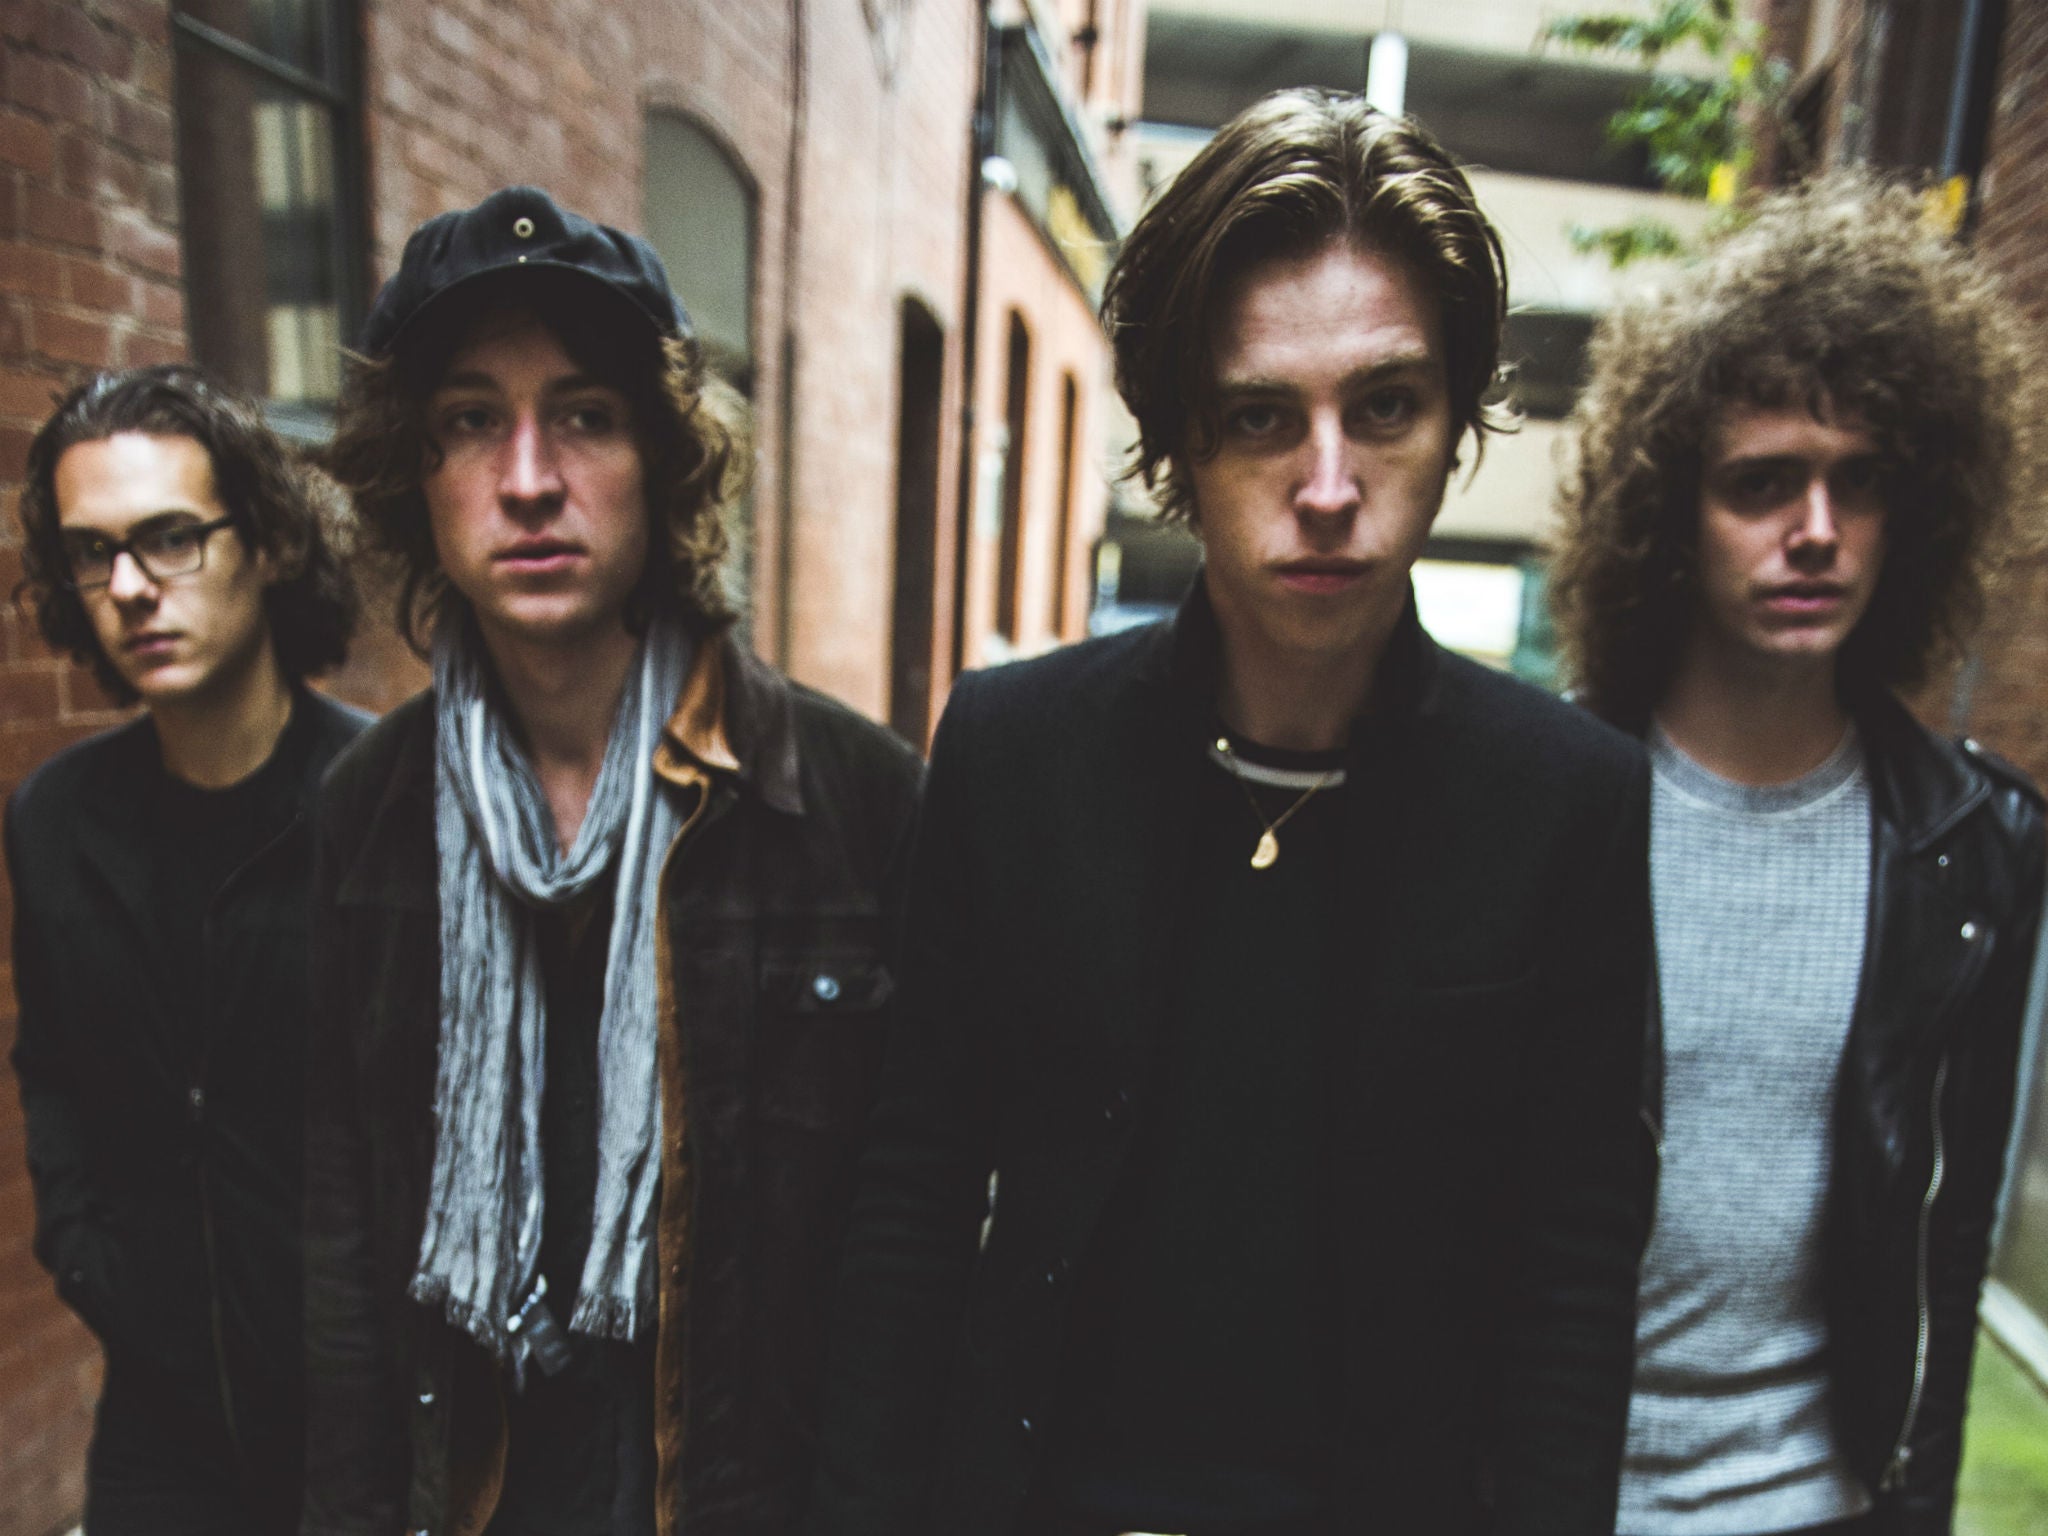 Catfish and the Bottlemen look set to emerge from relative indie obscurity